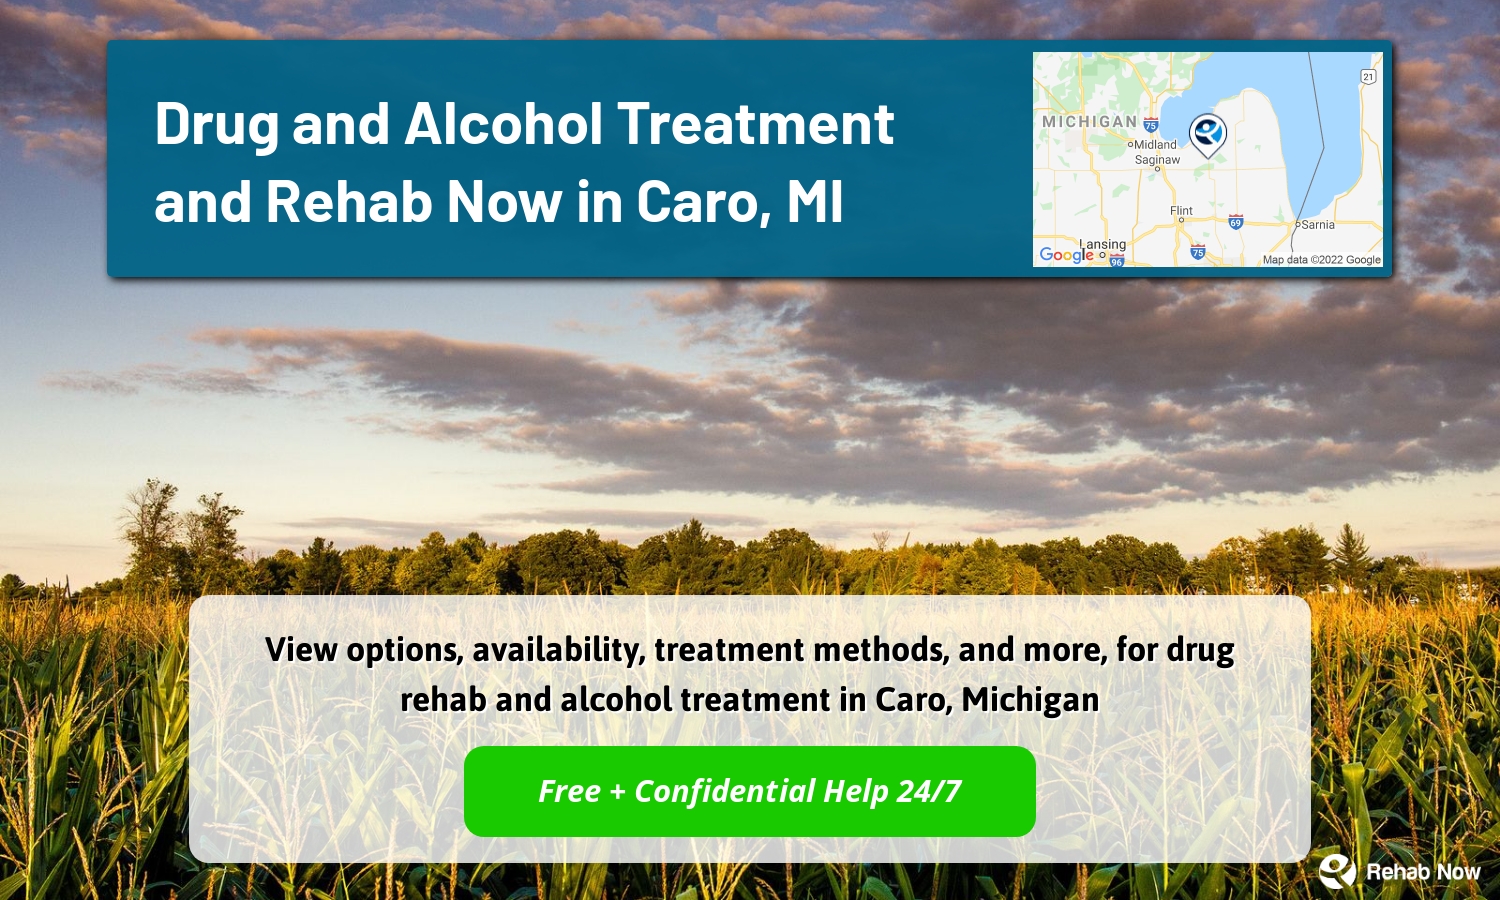 View options, availability, treatment methods, and more, for drug rehab and alcohol treatment in Caro, Michigan